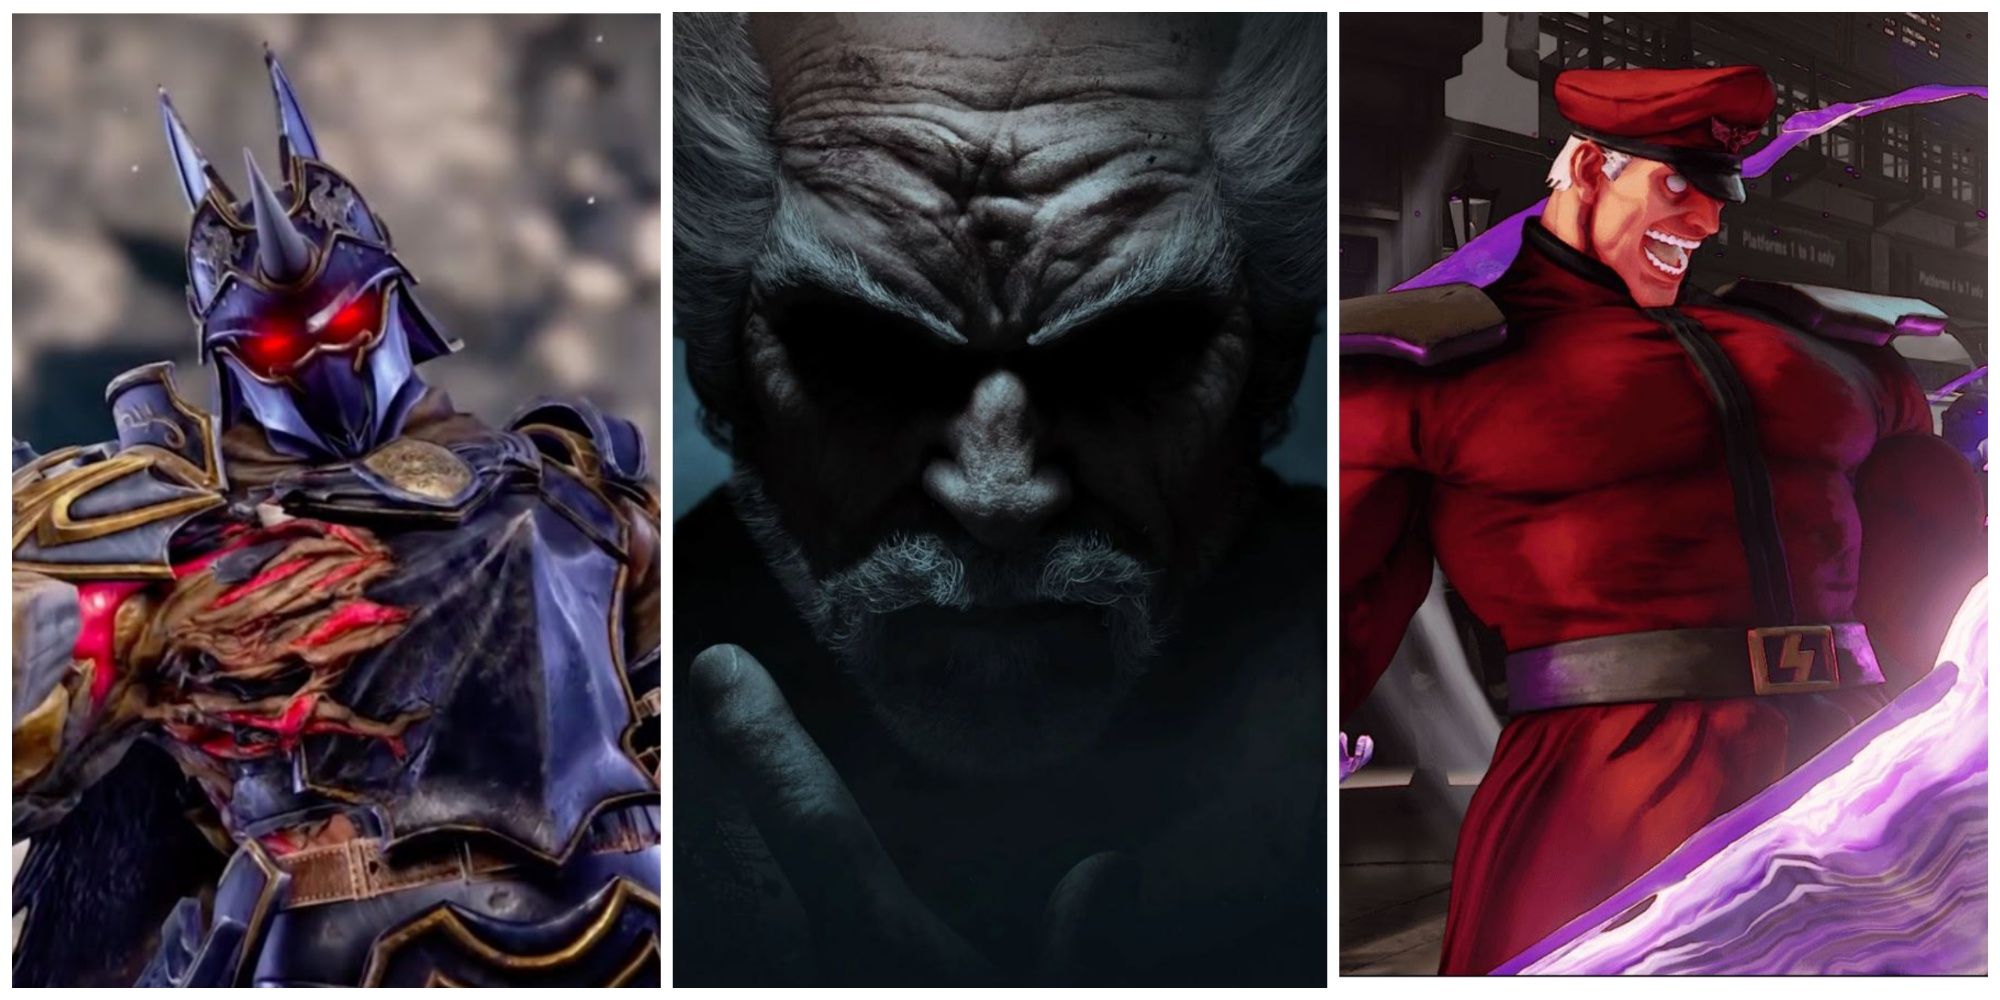 Nightmare from soul calibur, Heihachi from tekken, and M.Bison from street fighter